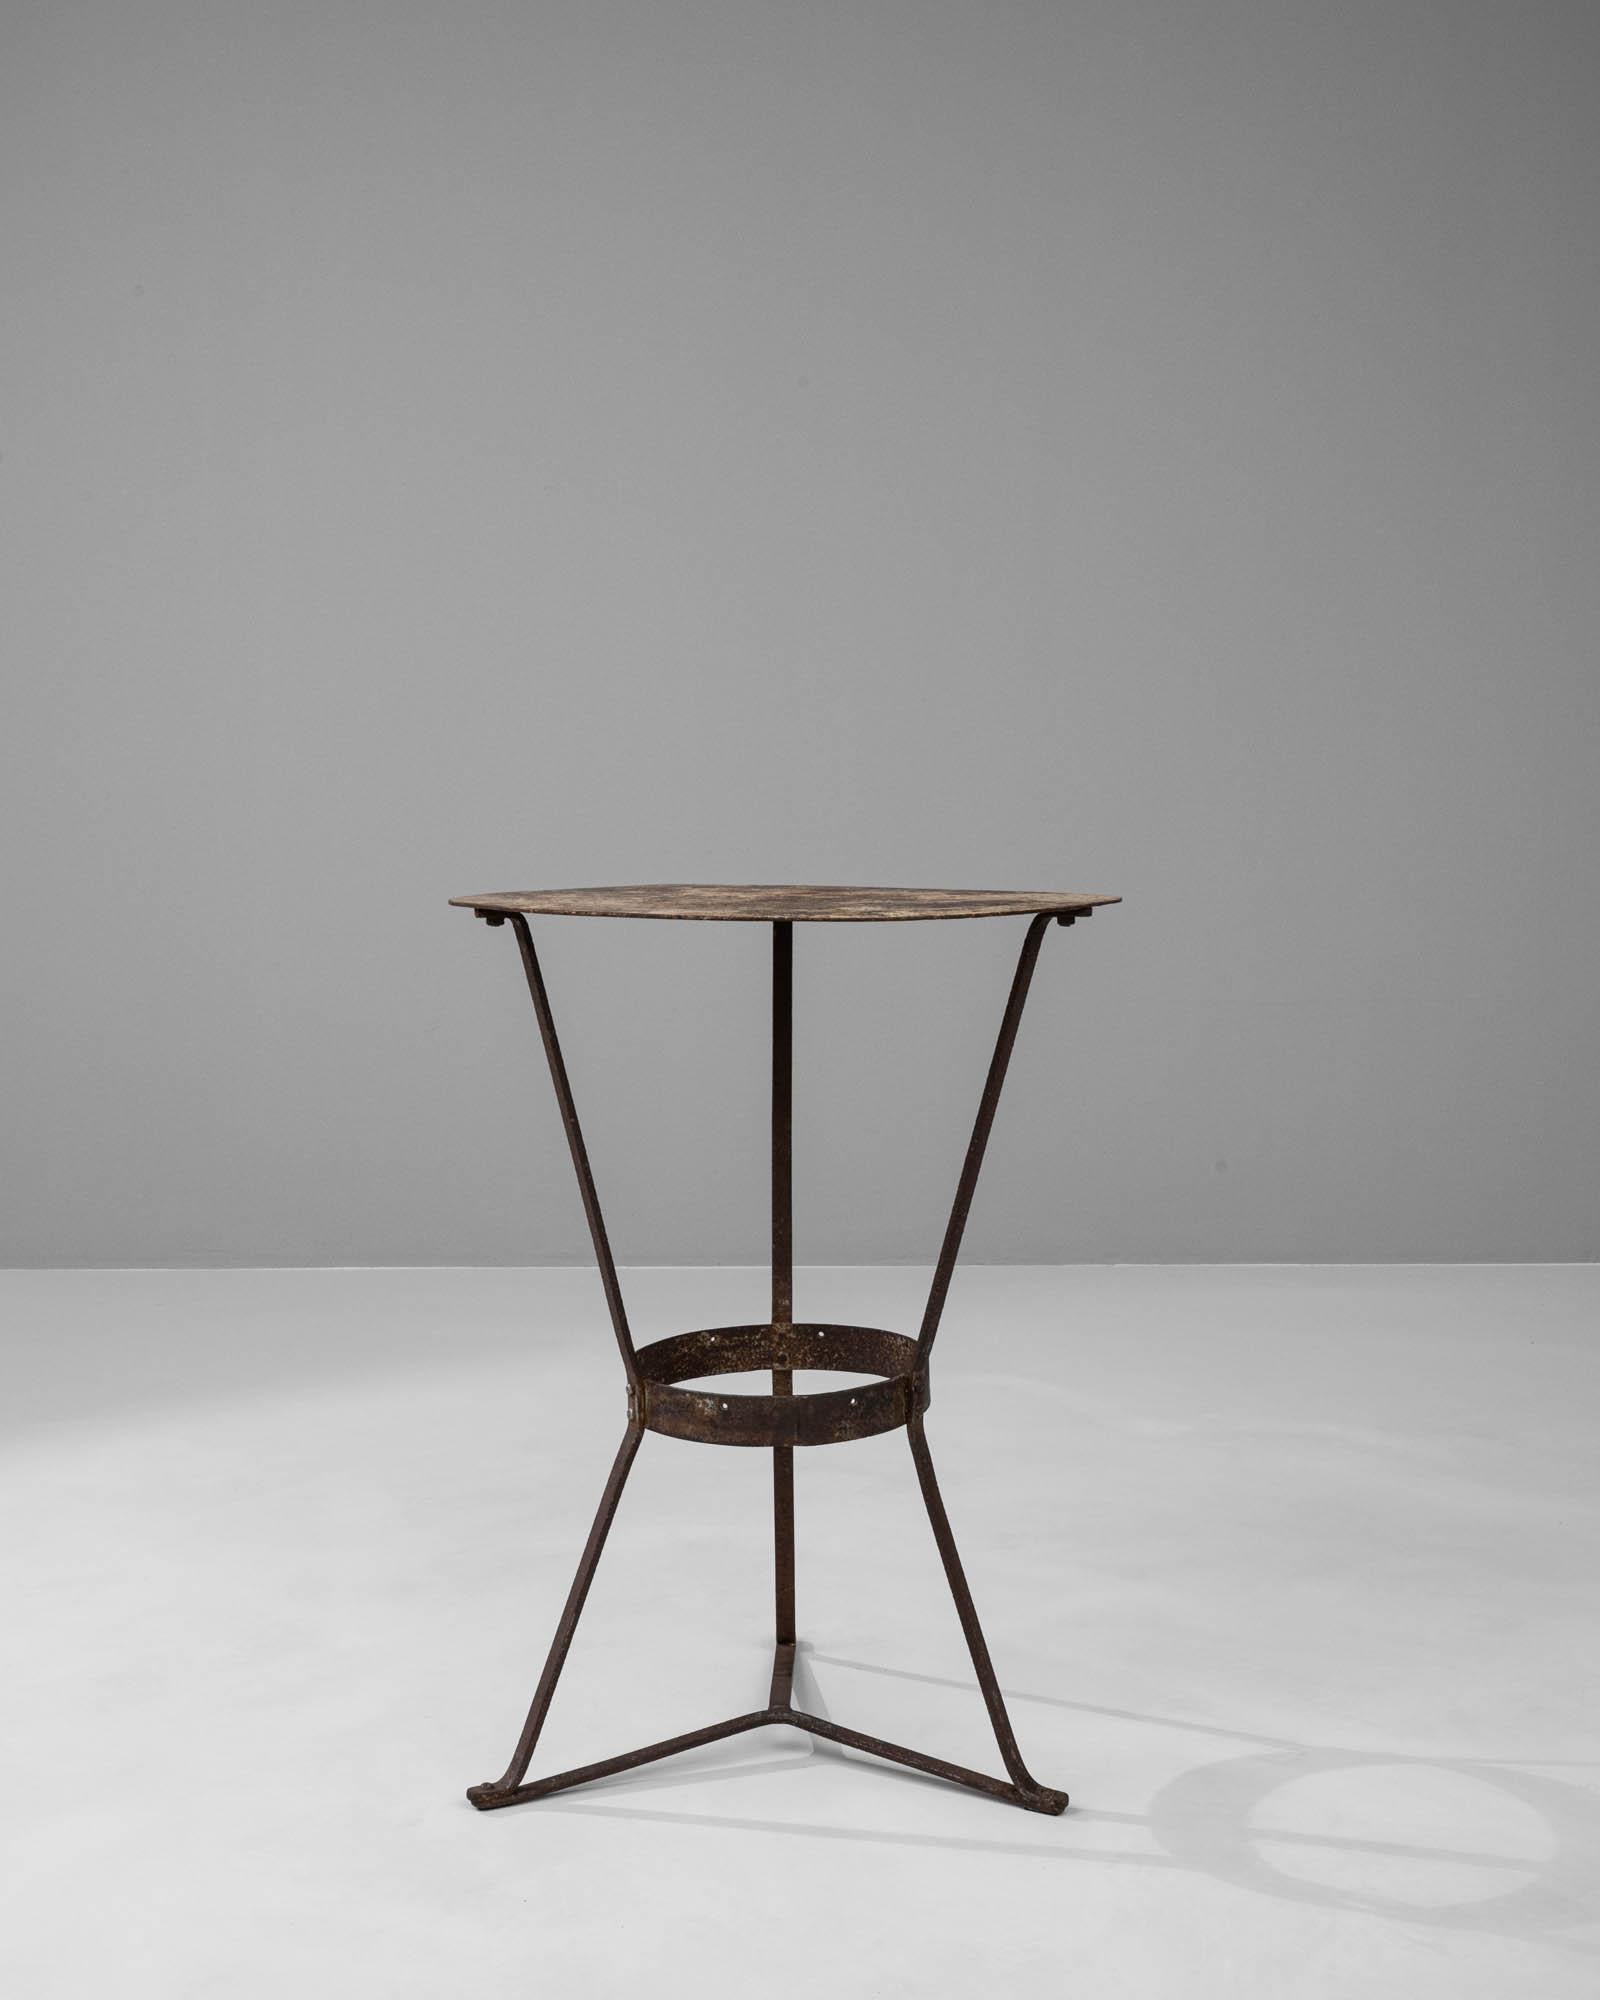 This early 1900s French metal side table embodies the industrial elegance of the era, presenting a simple yet impactful design. The clean lines of its triangular base form a delicate but stable structure, culminating in a circular top that is modest